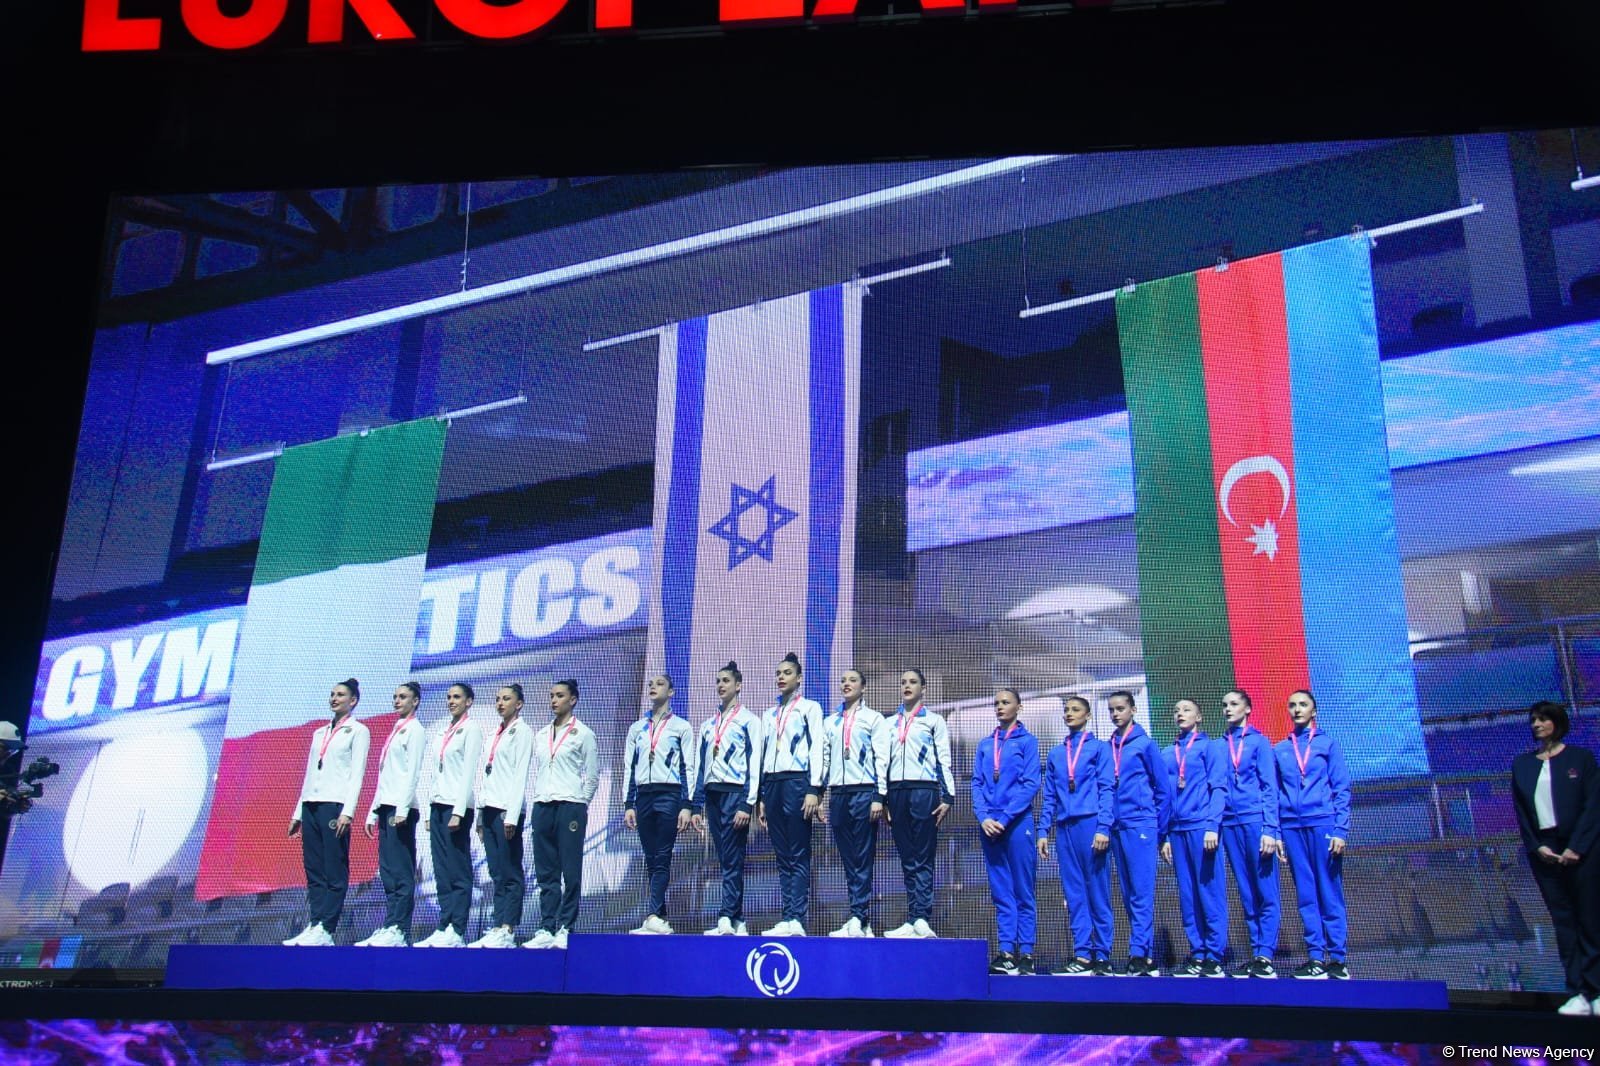 European Cup in Baku hosts award ceremony for teams in group exercises (PHOTO)